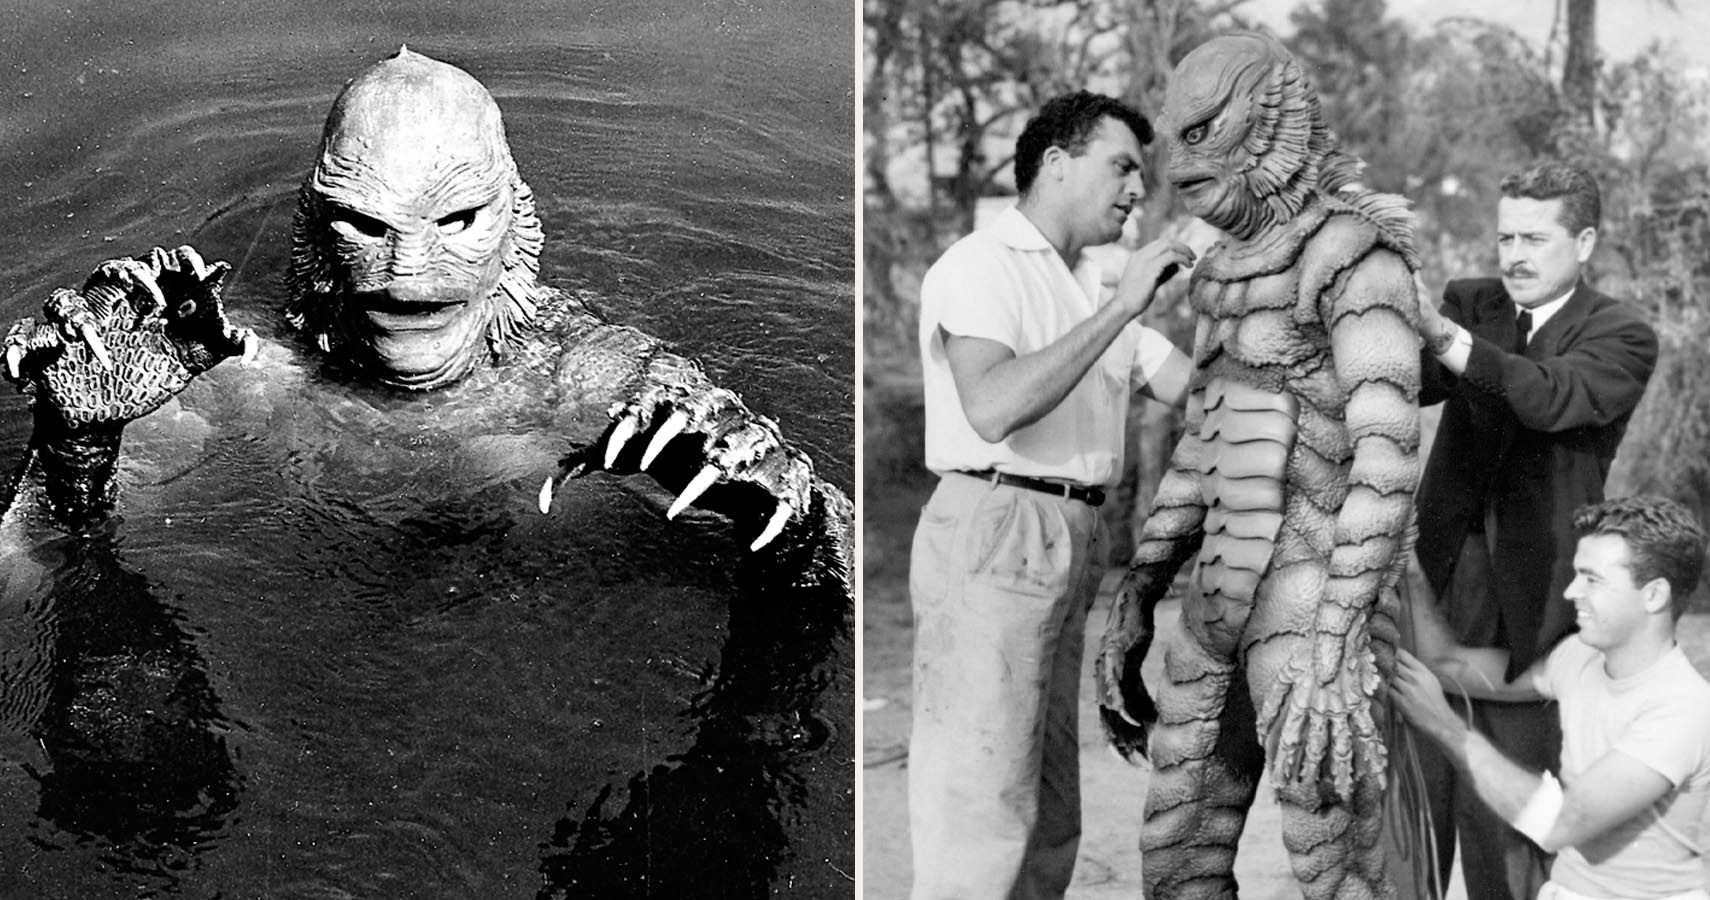 10 Things You Probably Didn’t Know About Creature From The Black Lagoon featured image